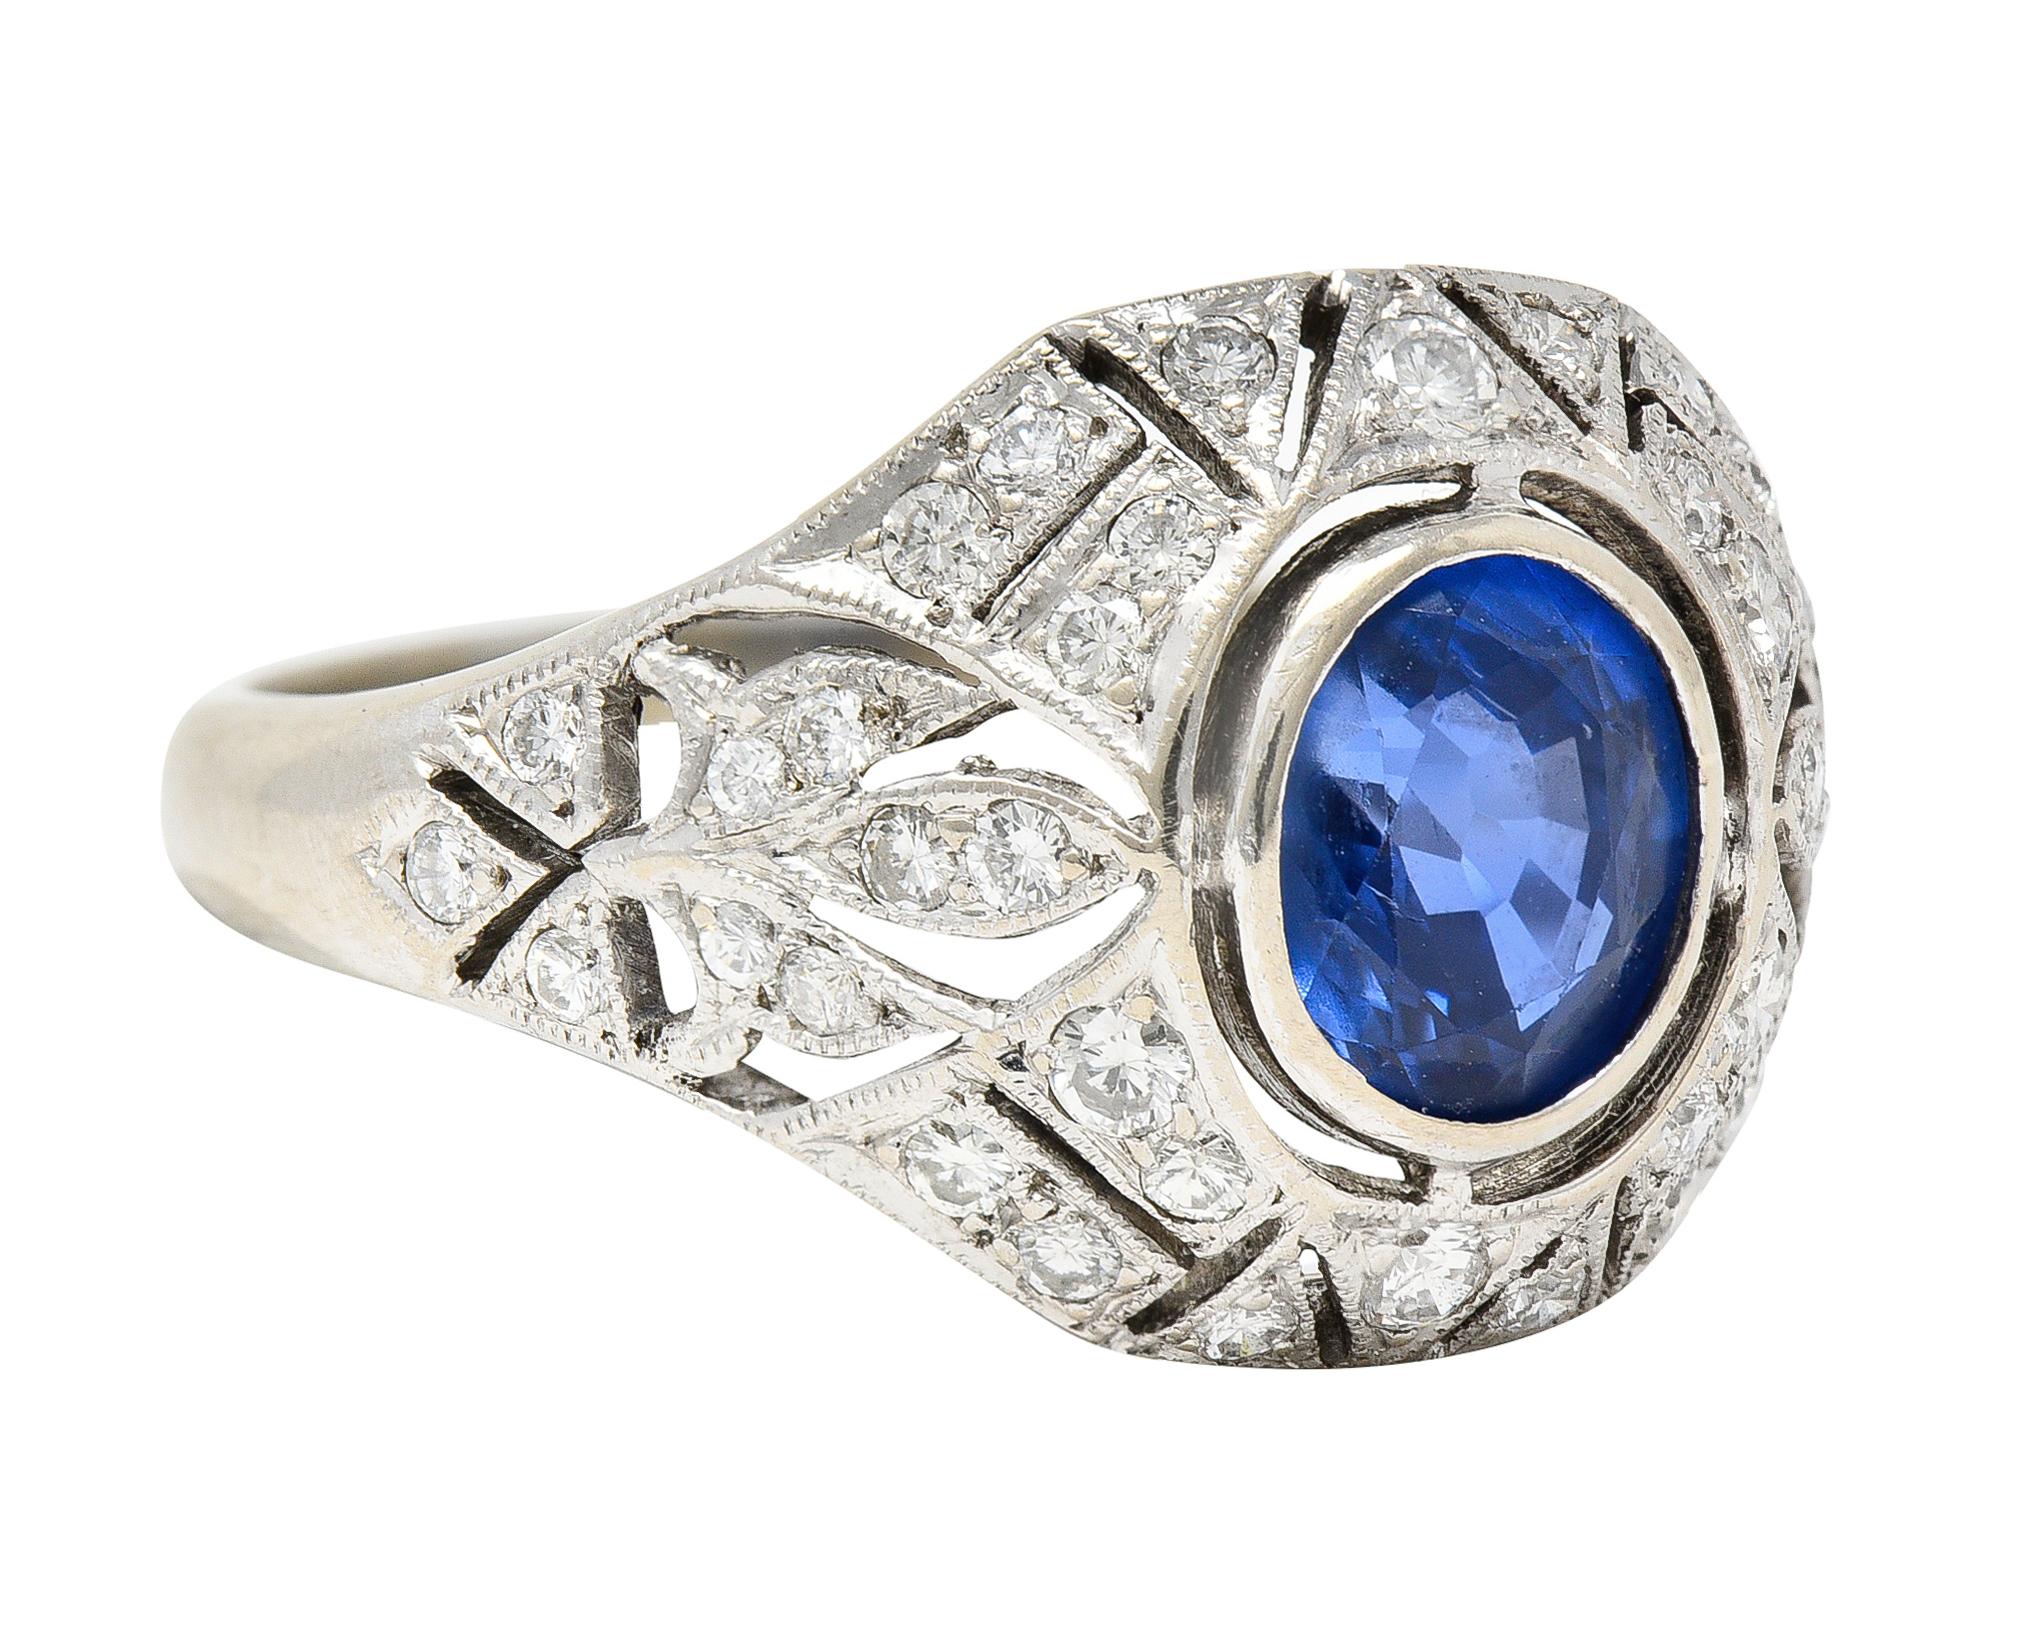 Centering an oval cut sapphire weighing approximately 1.20 carats - transparent medium blue. Bezel set with a pierced geometric surround and fleur-de-lis motif shoulders. Featuring round brilliant cut diamonds bead set throughout. Weighing